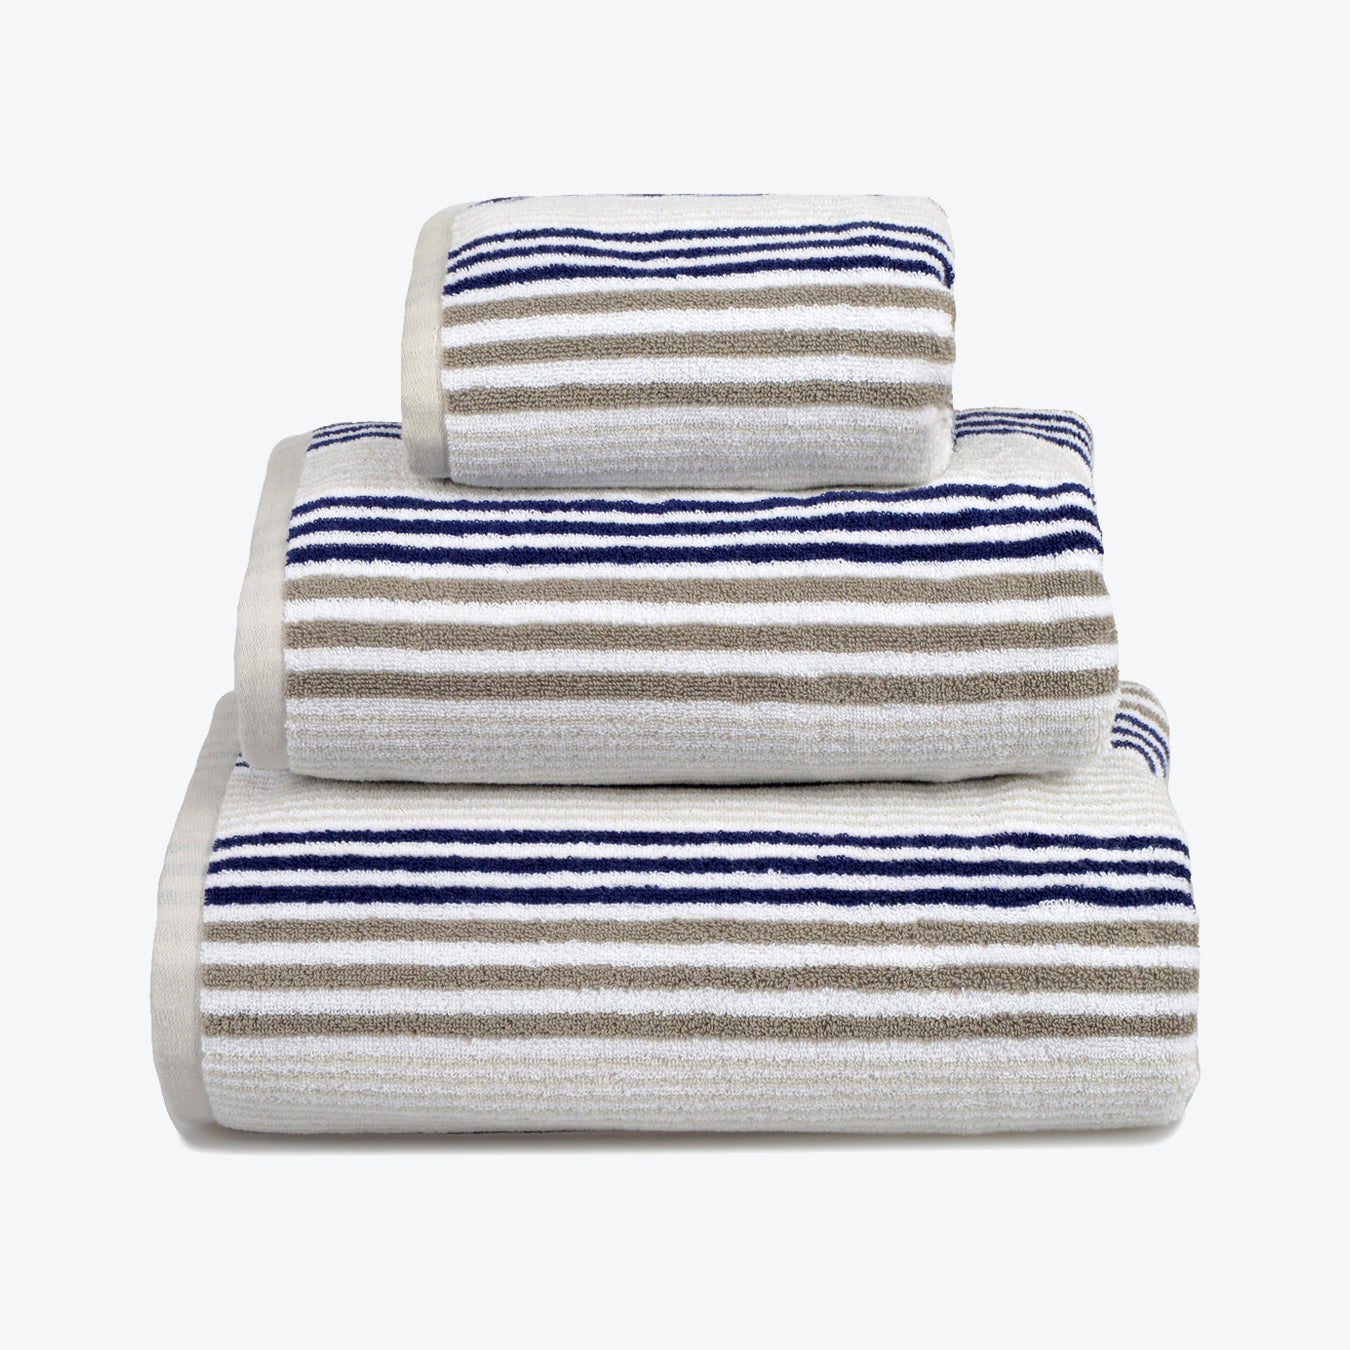 Grey/White/Navy Striped Bathroom Towels - Navy Blue Patterned Towels